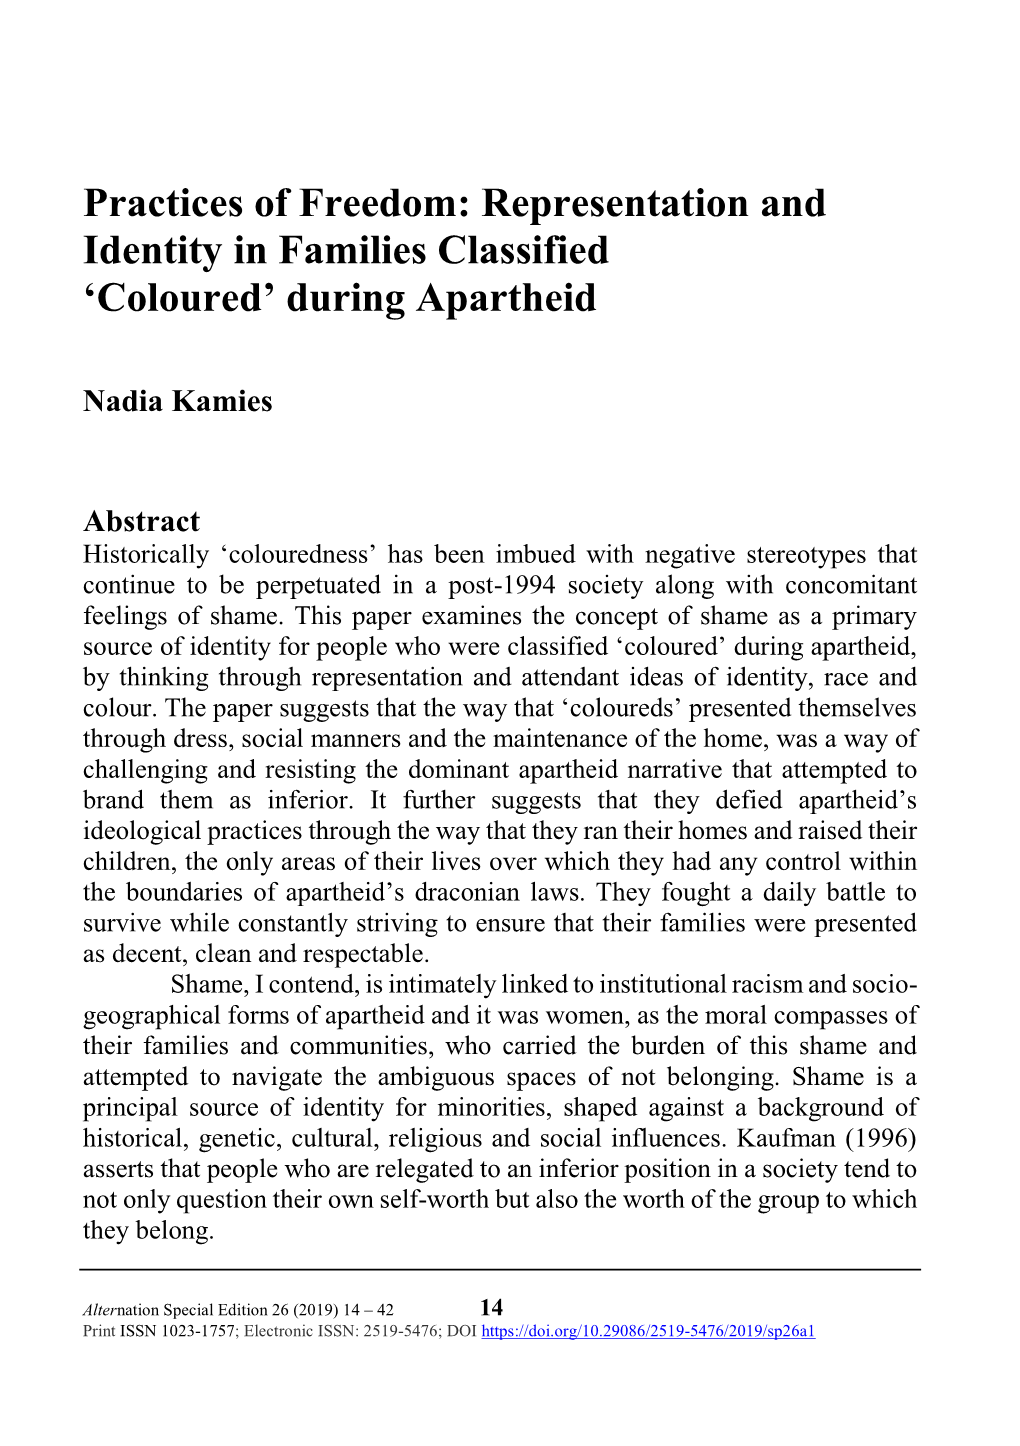 Representation and Identity in Families Classified 'Coloured'